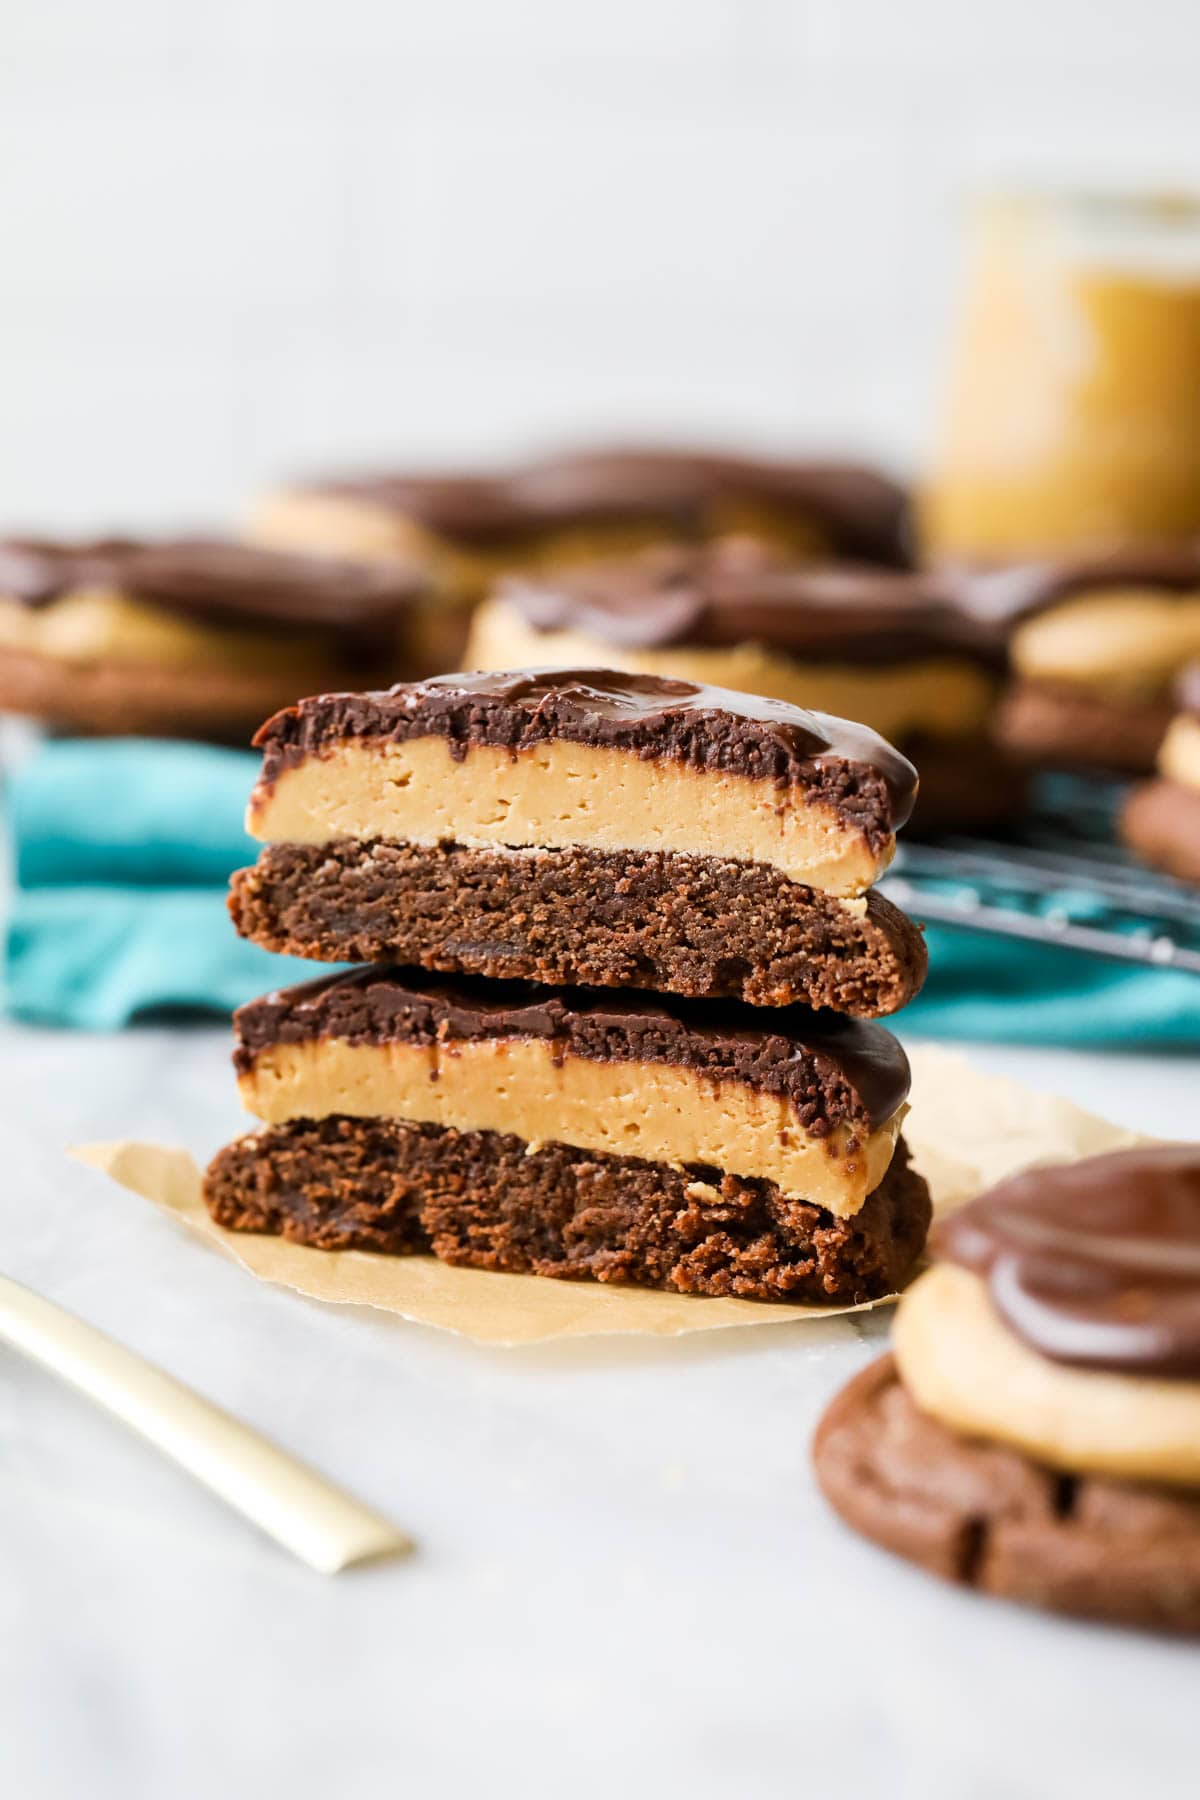 Two halves of a buckeye cookie stacked on top of each other to show layers of chocolate cookie, peanut butter, and chocolate.